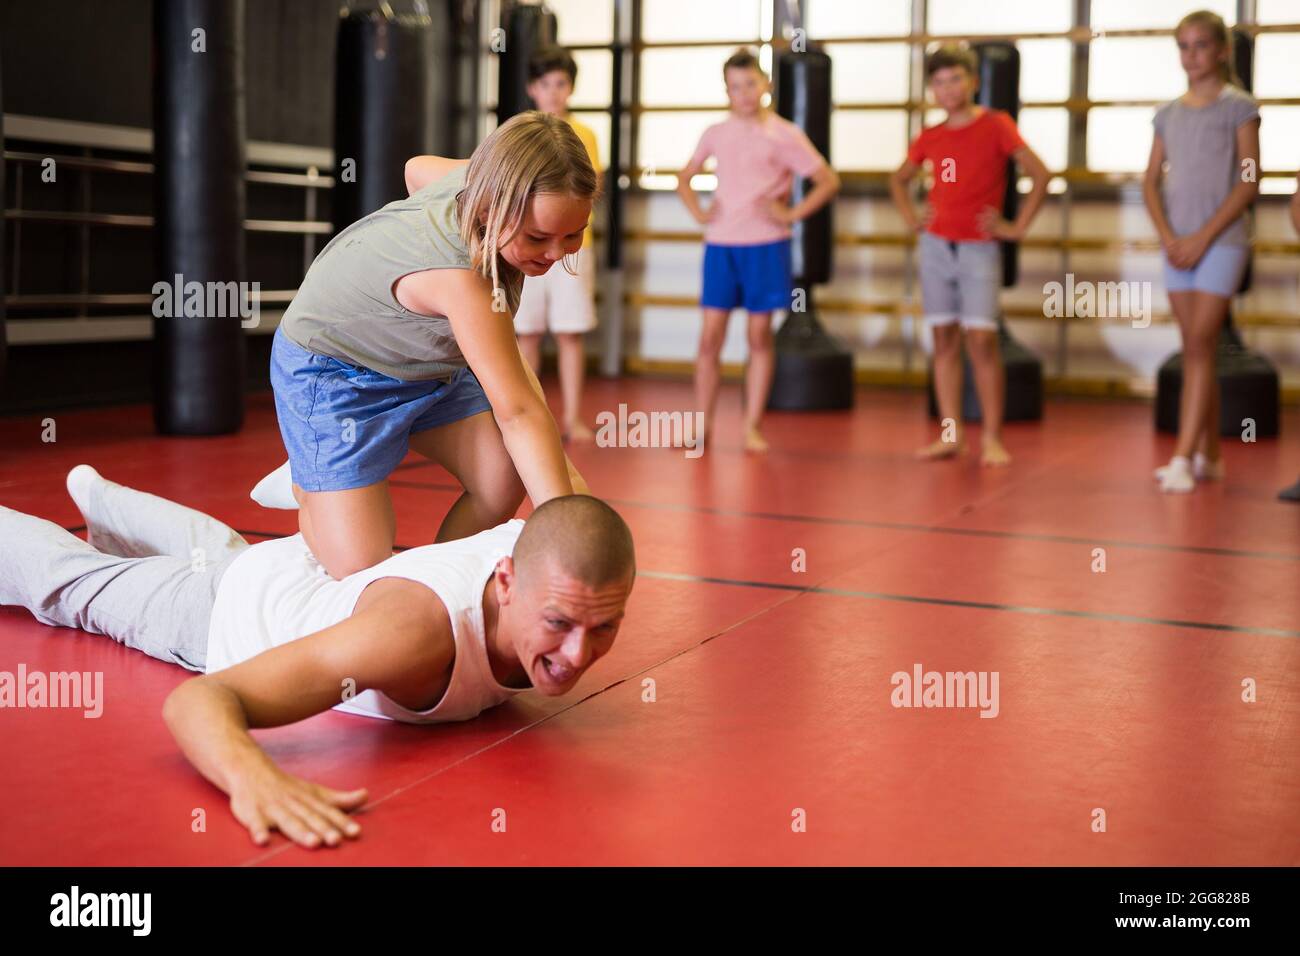 Young Schoolgirl Practicing Basic Self Defense Moves Stock Photo Alamy